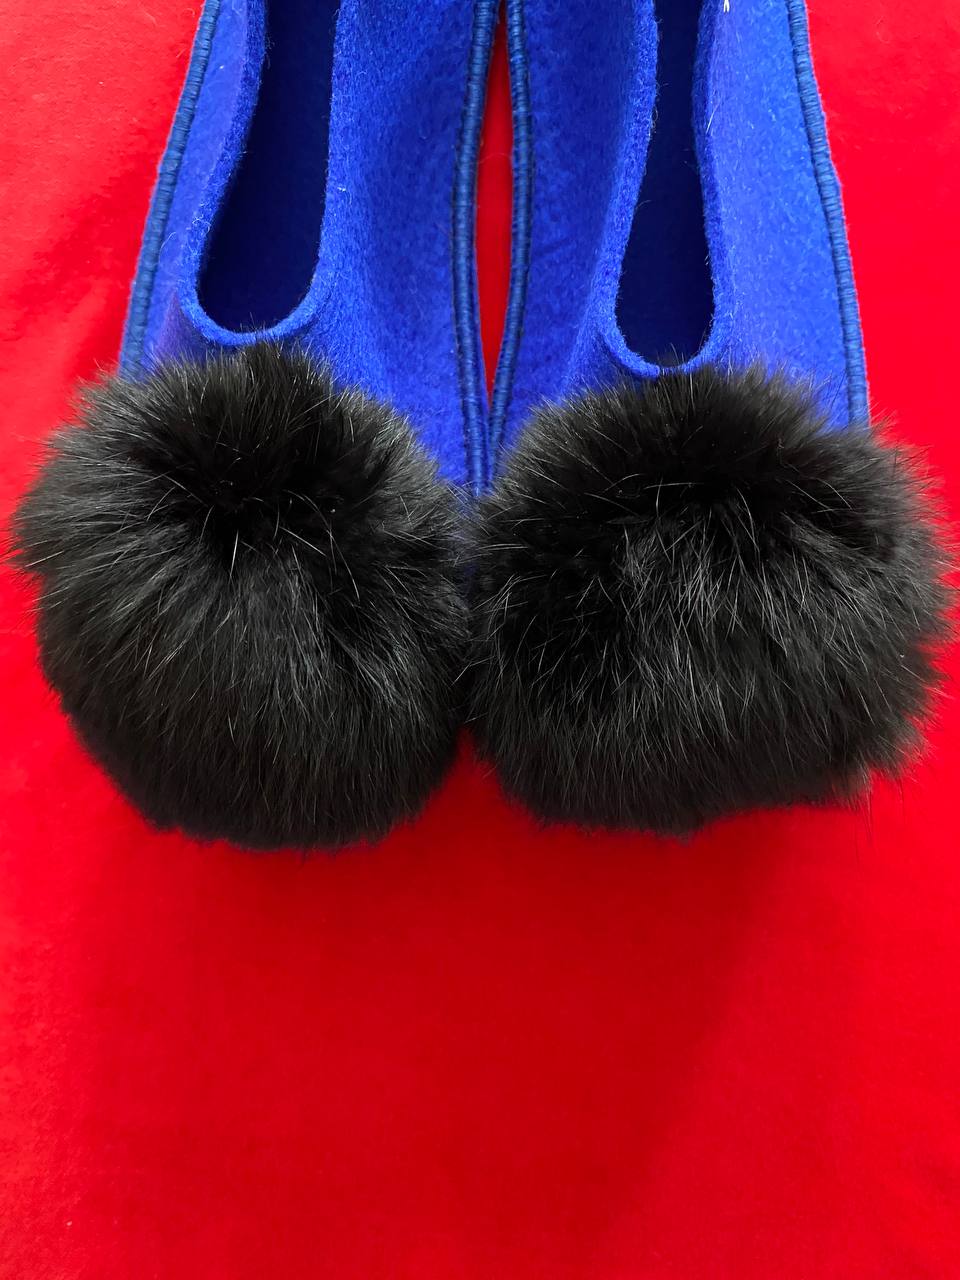 BLUE PAVEMENT slippers